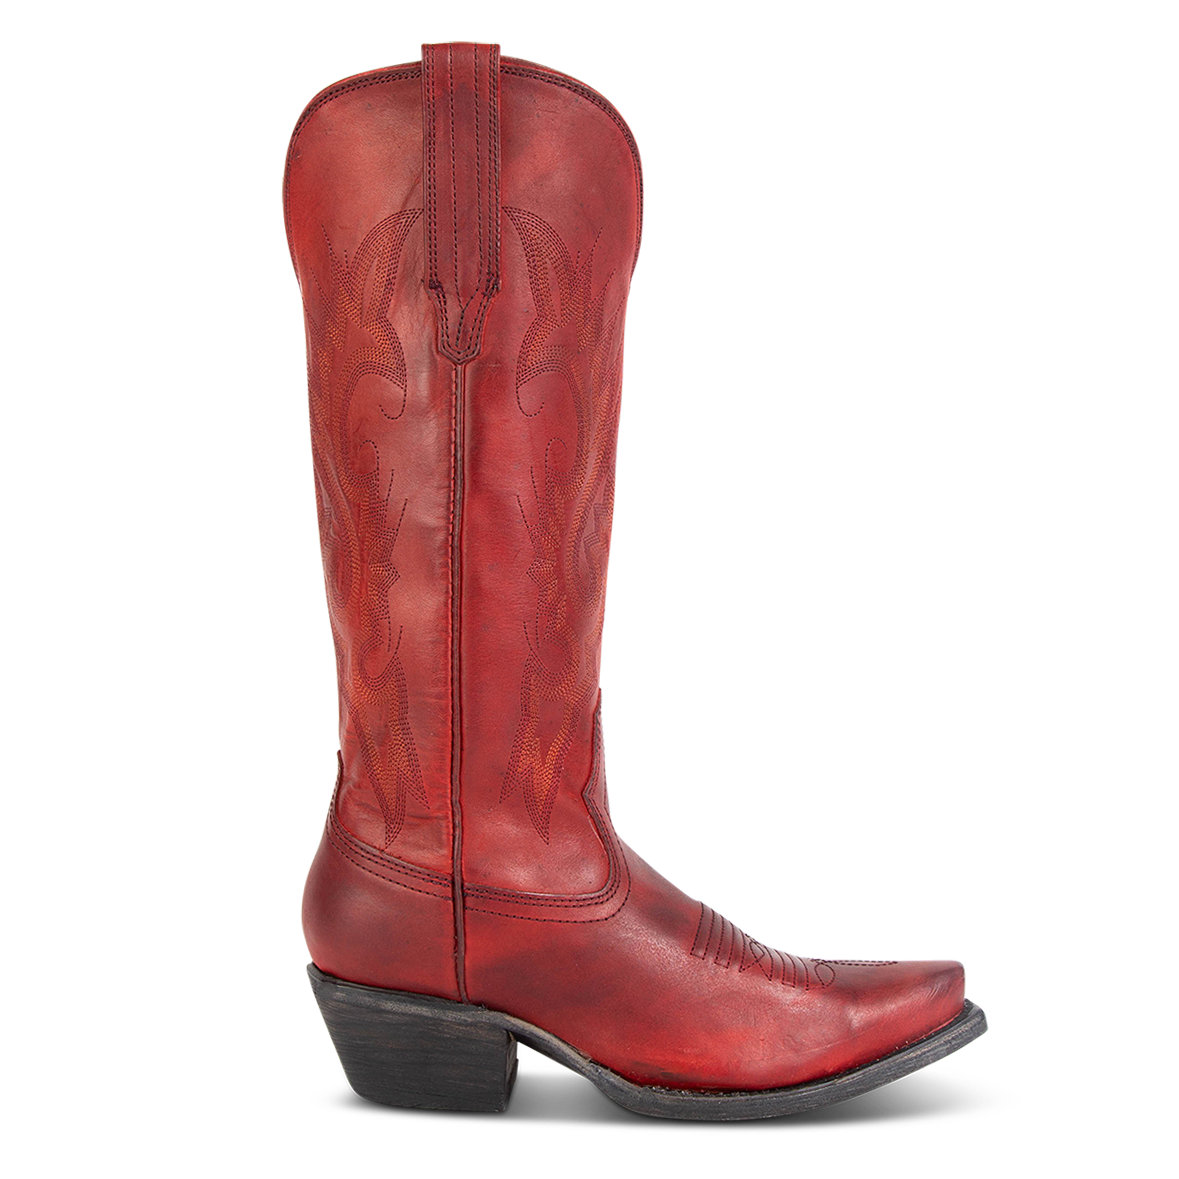 FREEBIRD women's Woodland red leather cowboy boot with stitch detailing and snip toe construction